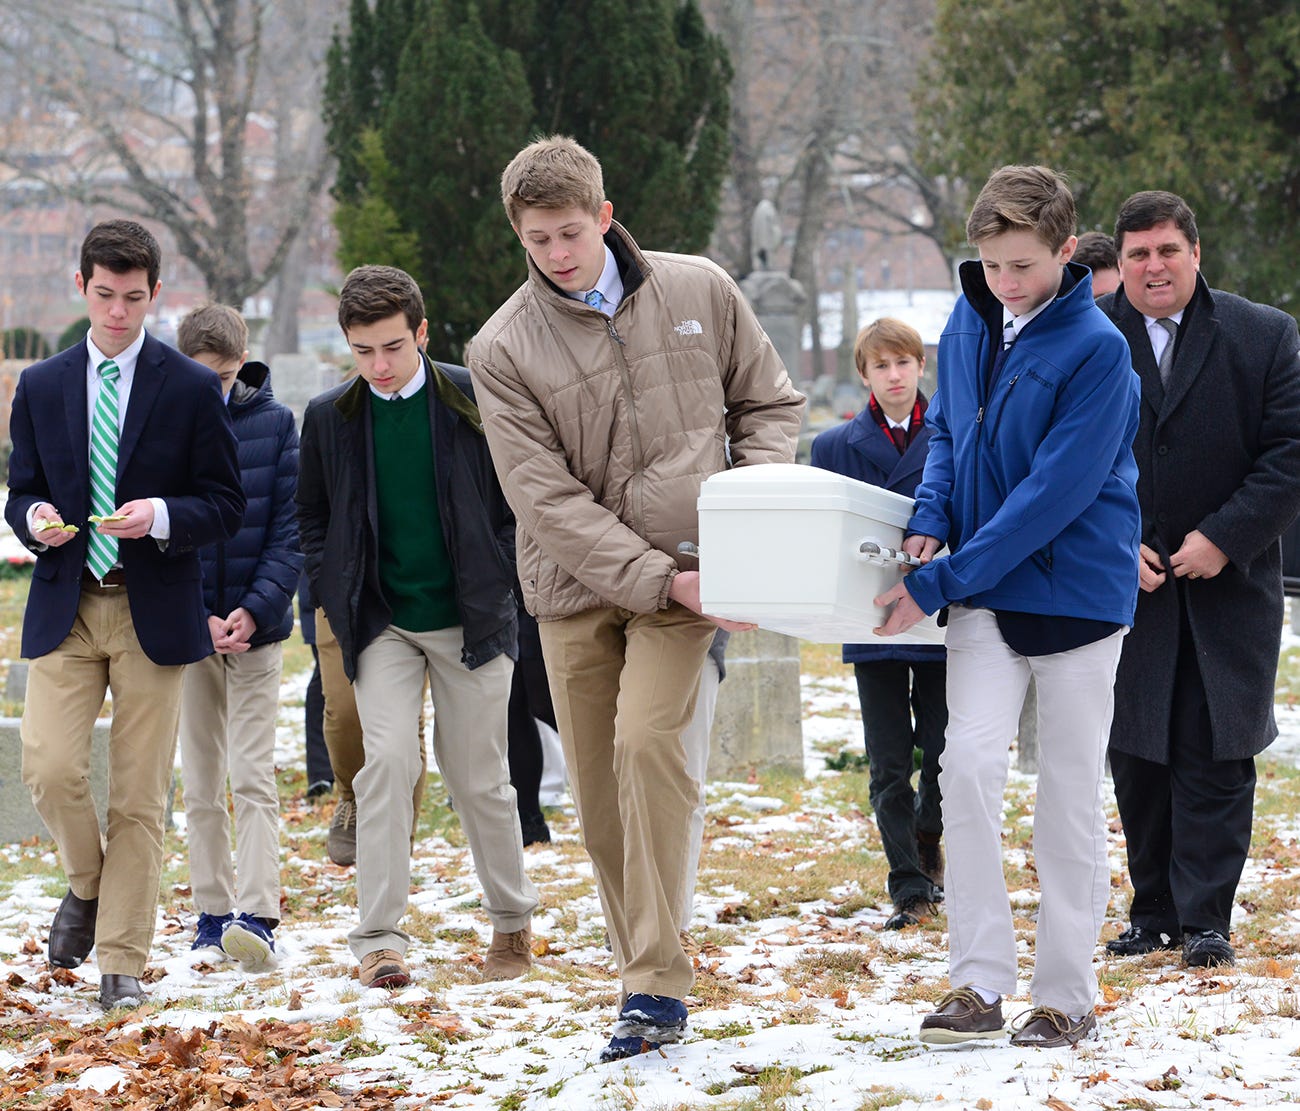 John Manahan and Finn Gannon carry the casket to the gravesite for the funeral services of a stillborn baby found abandoned in a Mine Hill recycling center in October.